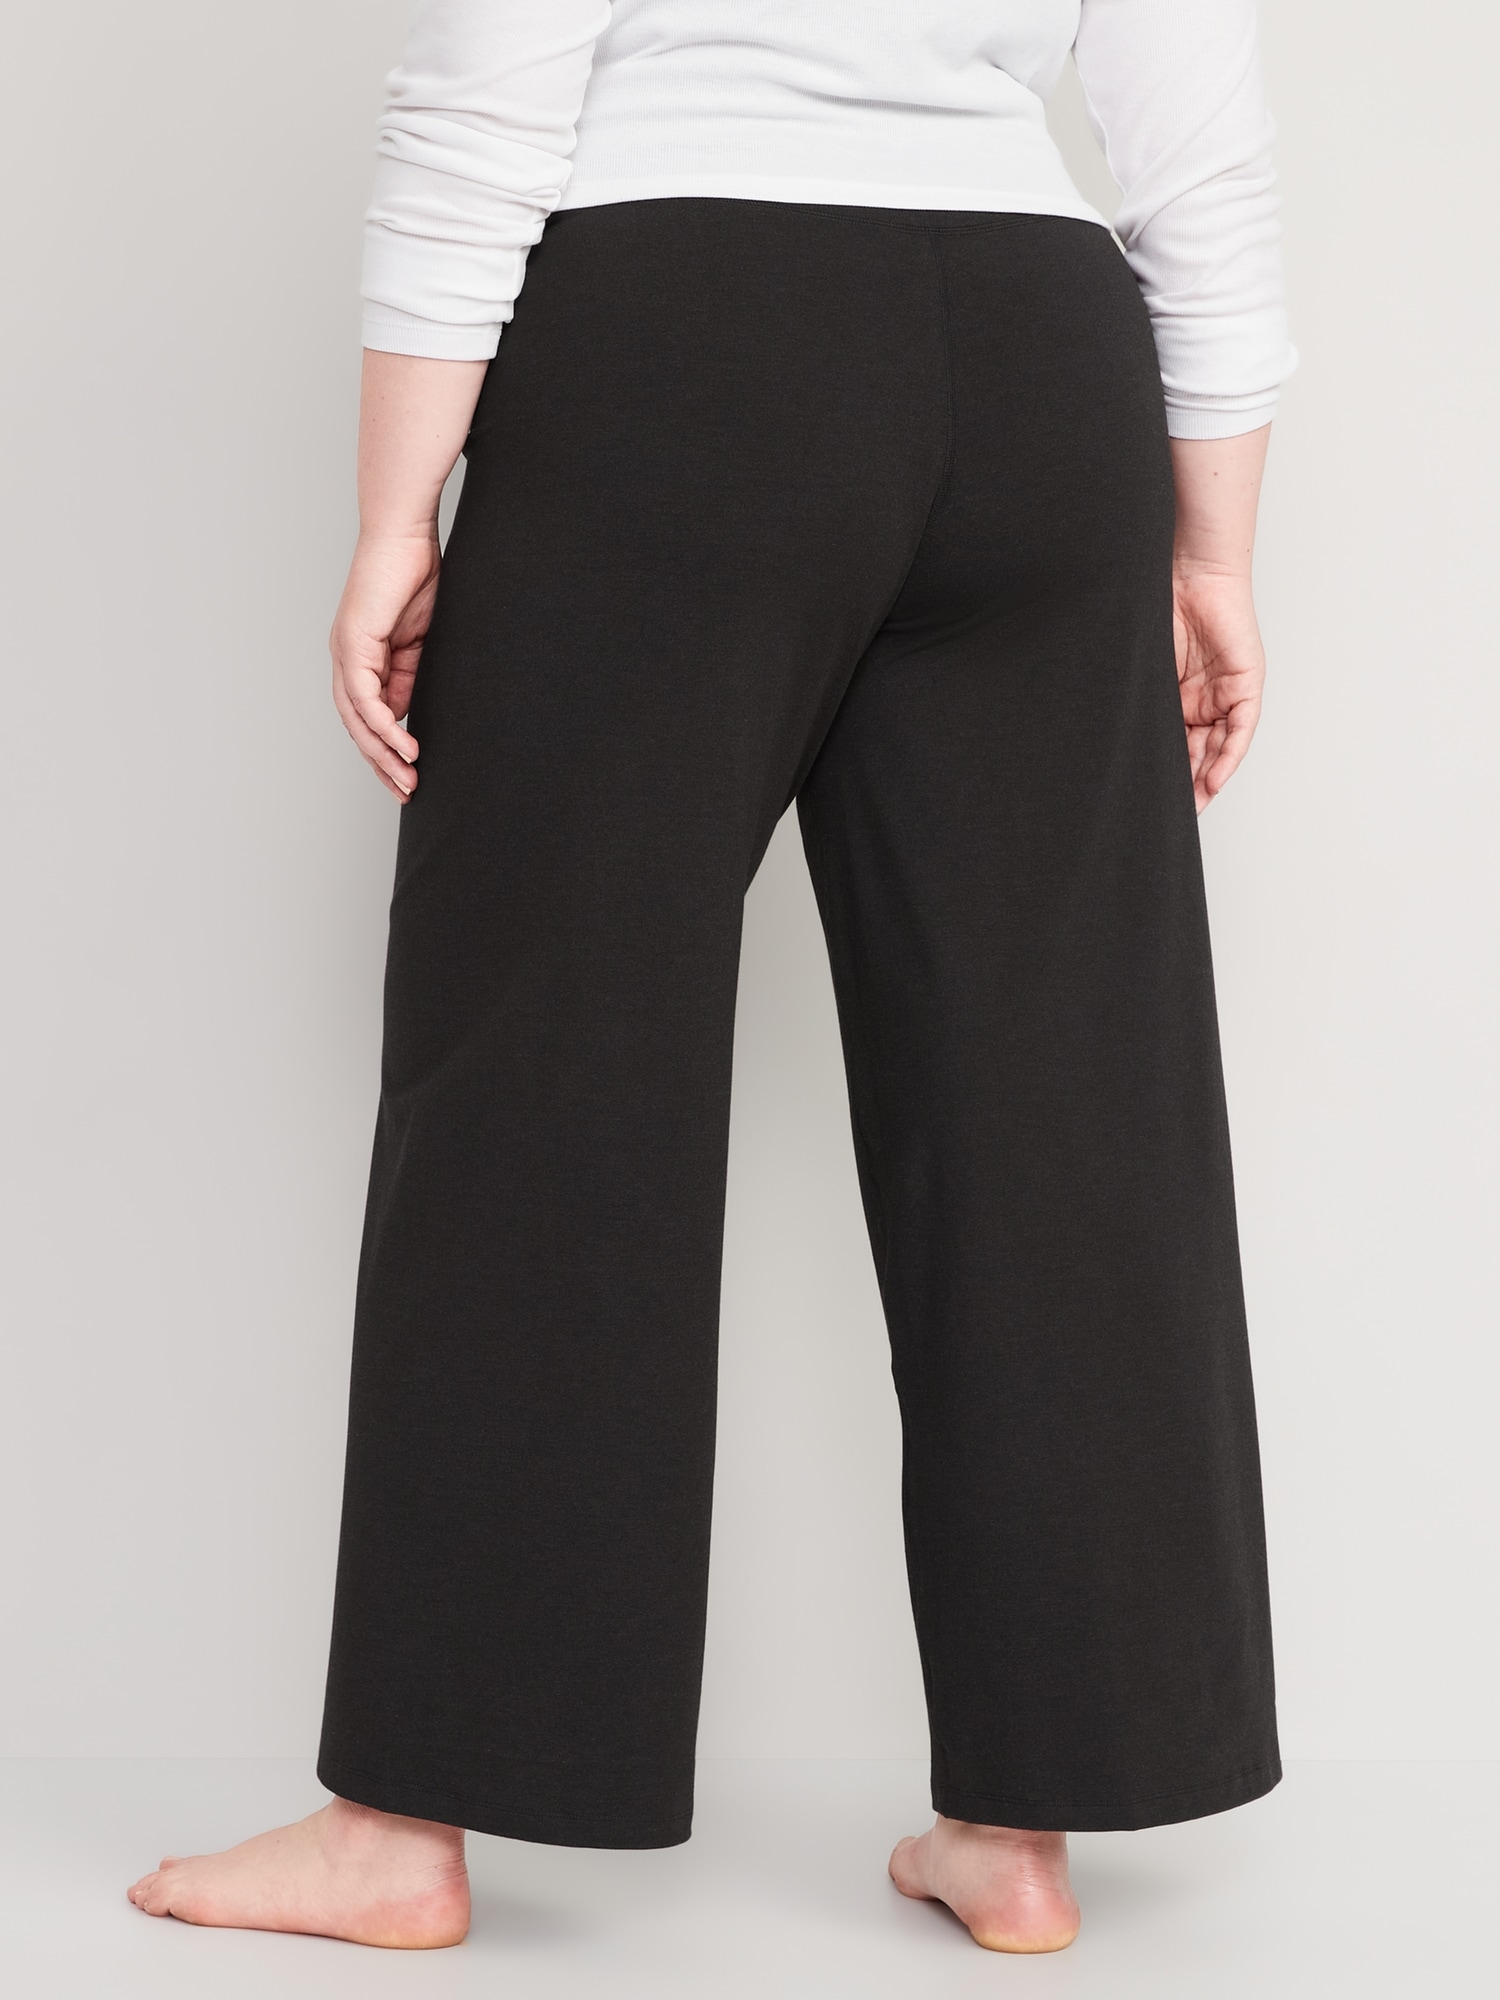 Cotton Yoga Pants with Pockets for Women Petite Wide Trousers